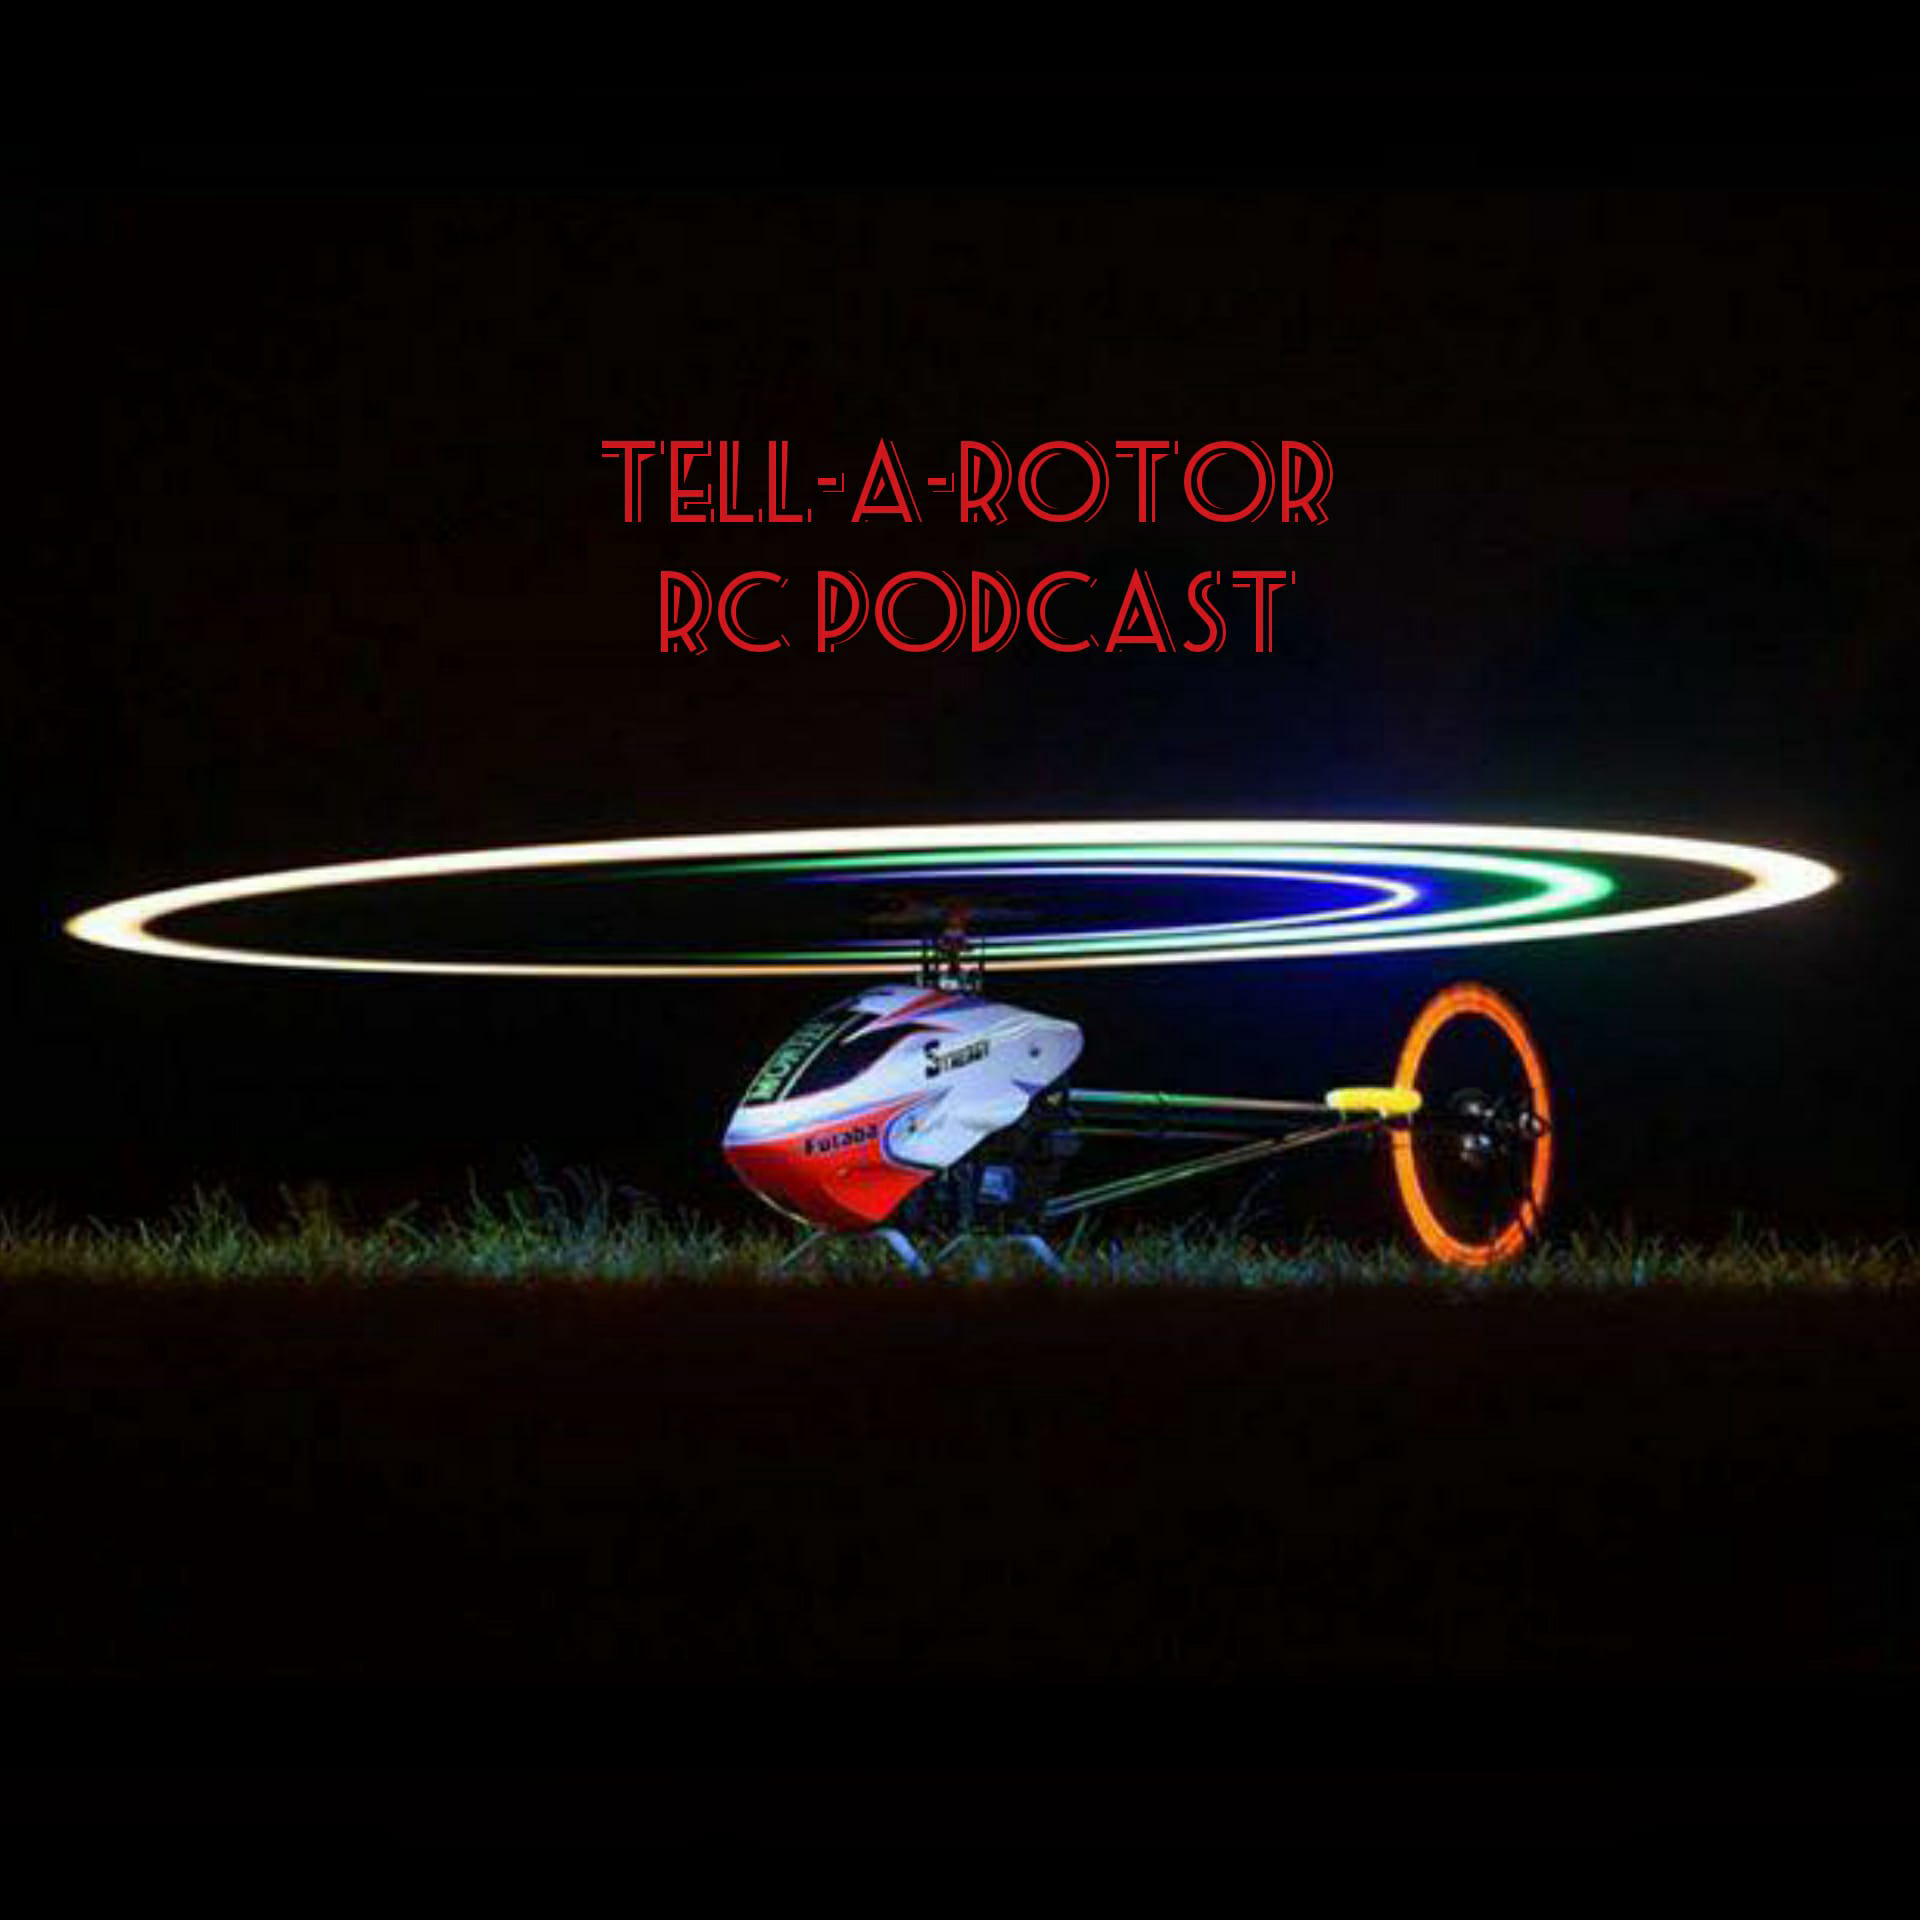 Episode 1 ”RC Helicopter Competition”